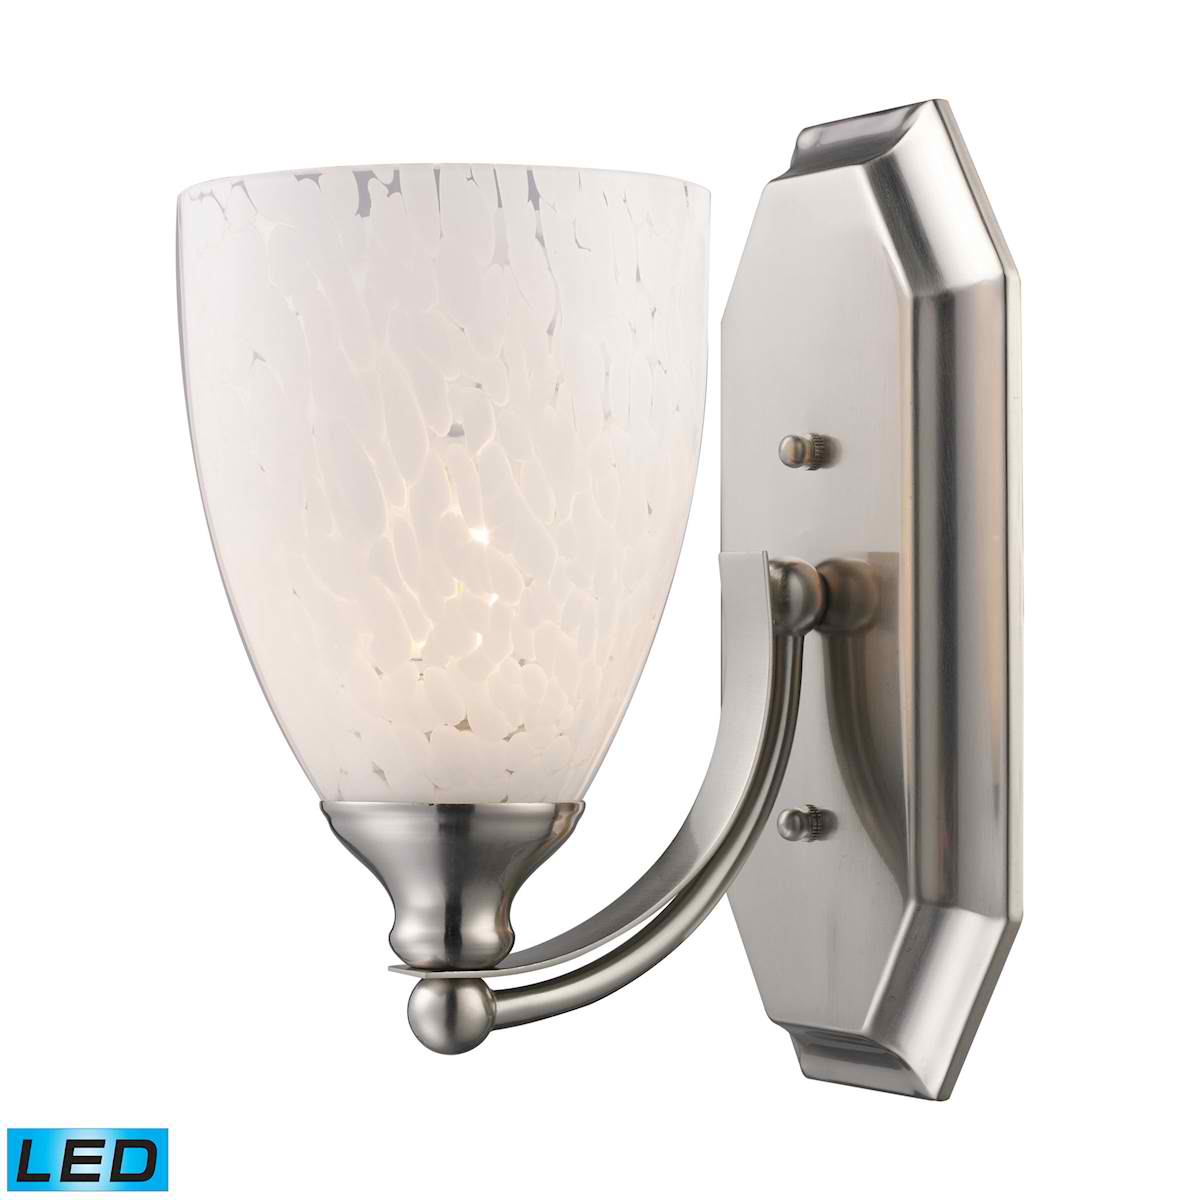 1 Light Vanity in Satin Nickel and Snow White Glass - LED Offering Up To 800 Lumens (60 Watt Equivalent)